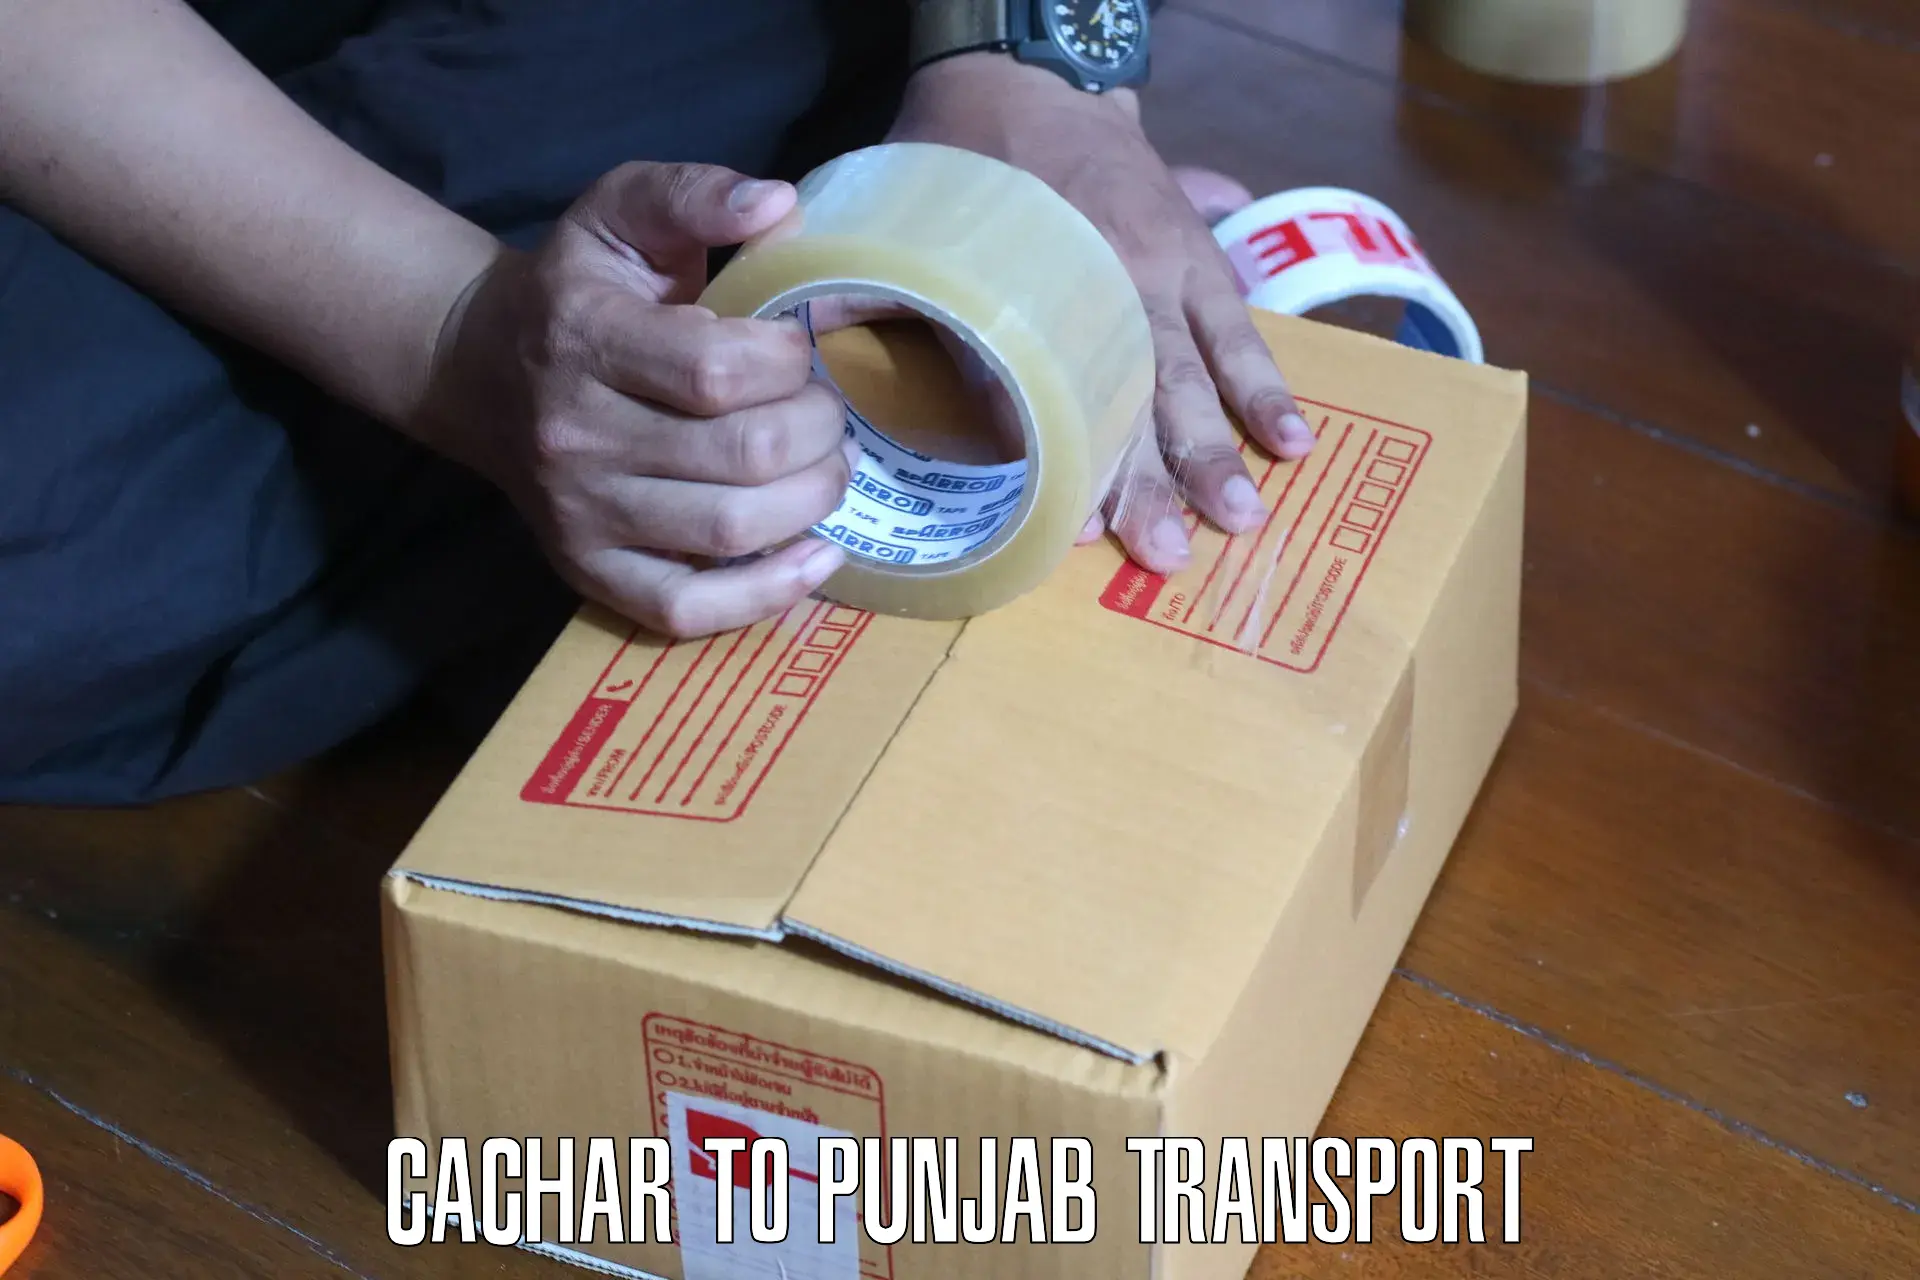 Container transport service Cachar to Jalandhar